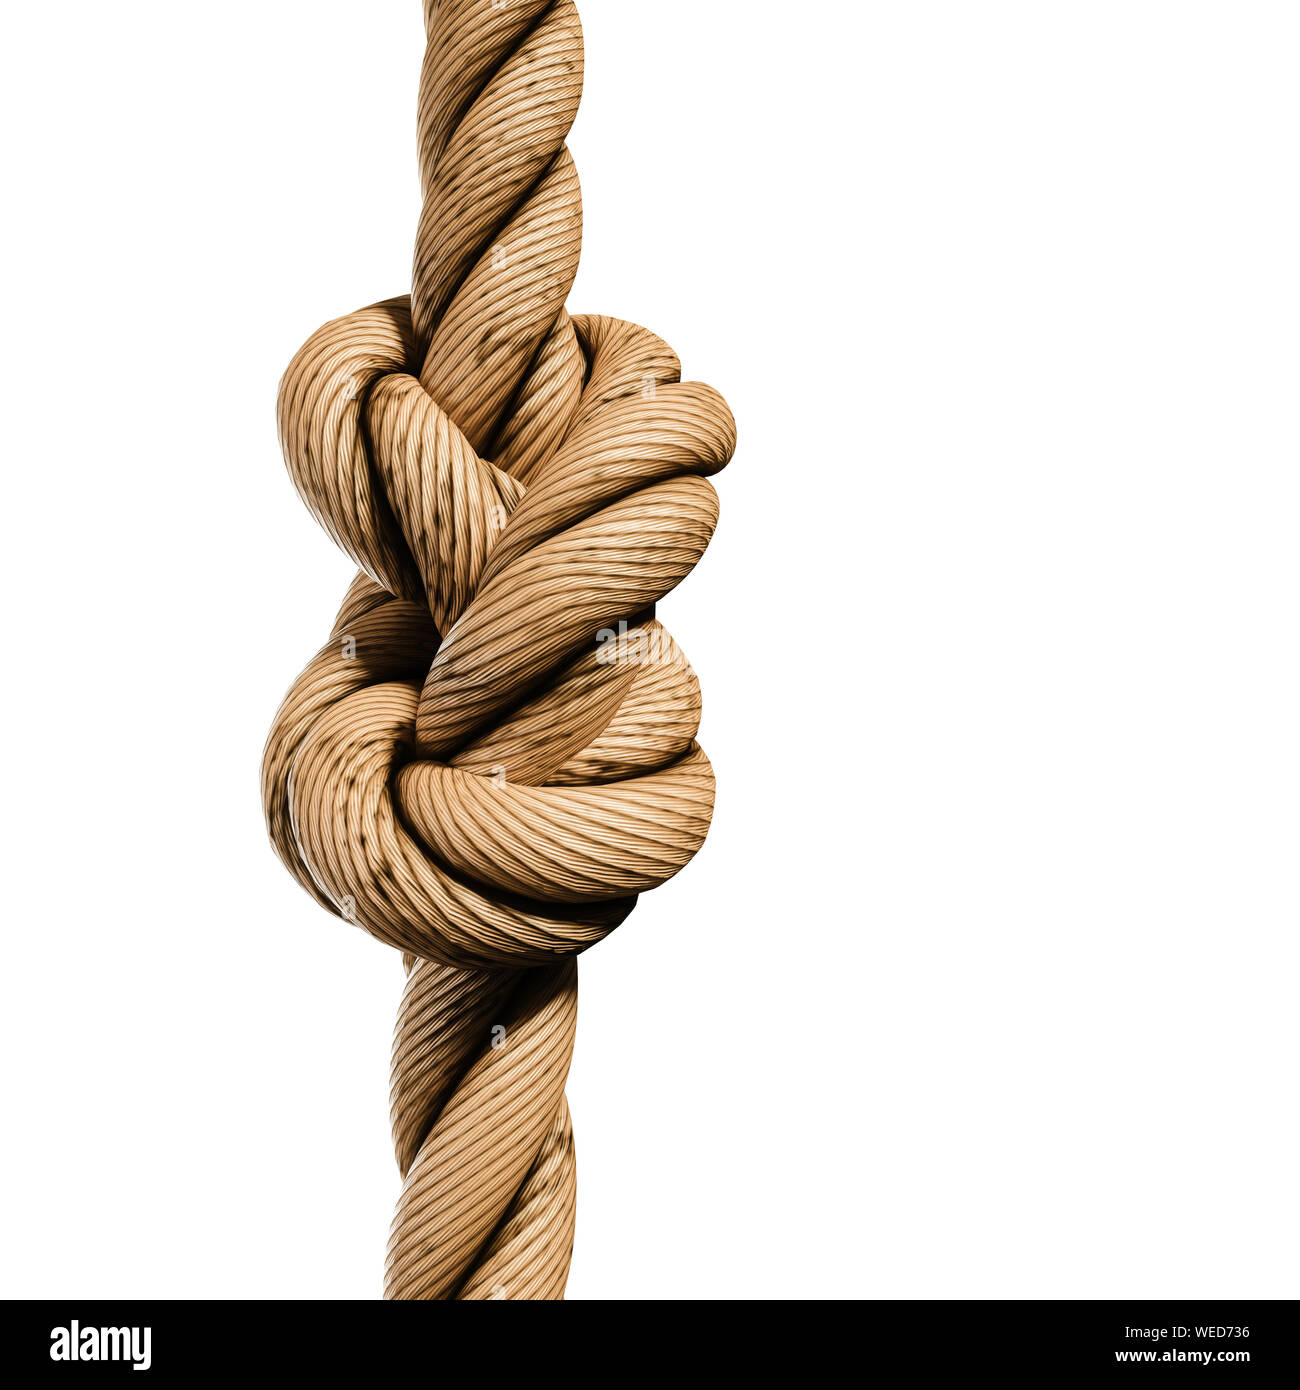 Rope Knot Isolated On A White Background As A Strong Nautical Marine Line  Tied Together As A Symbol For Trust And Faith And A Metaphor For Strength  Or Stress. Stock Photo, Picture